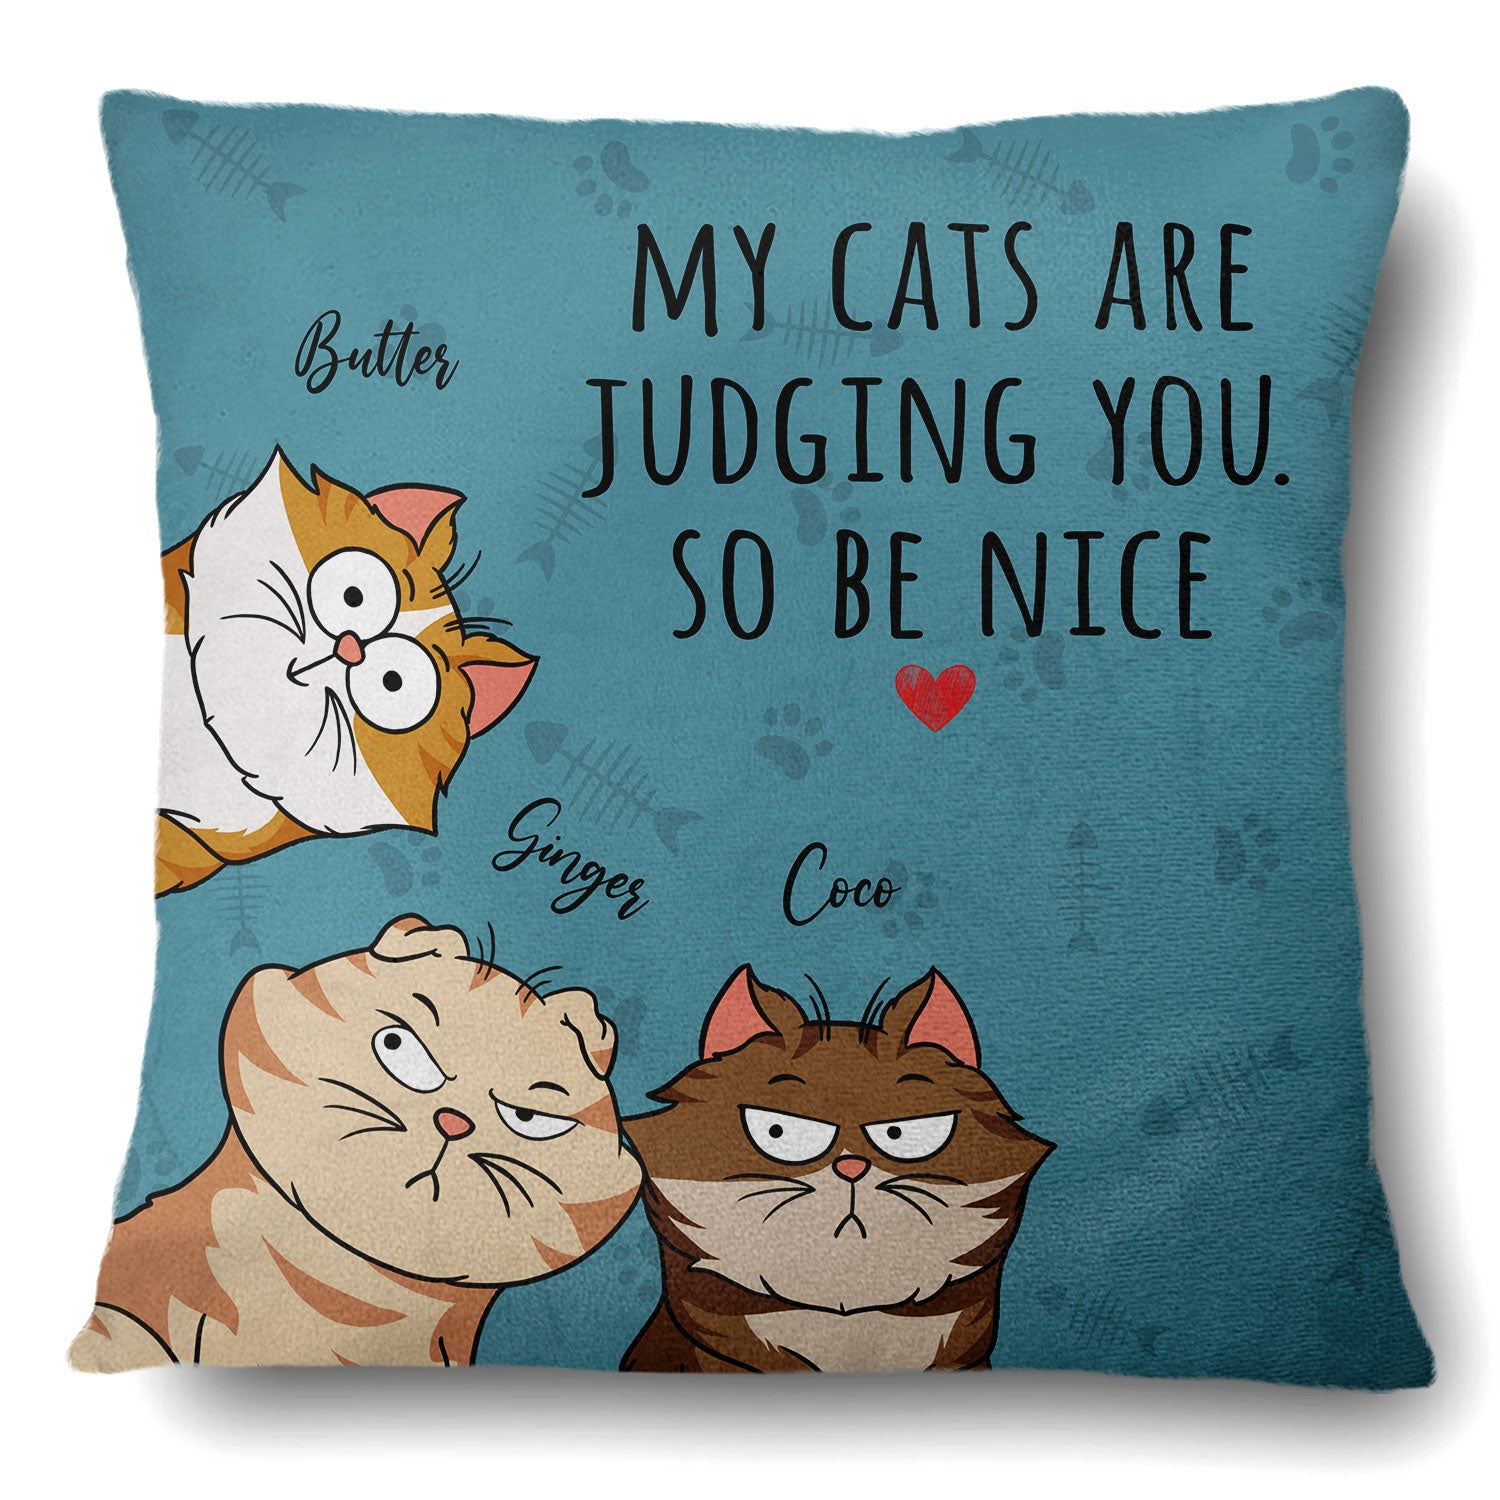 Judging You So Be Nice - Gift For Cat Lovers - Personalized Pillow